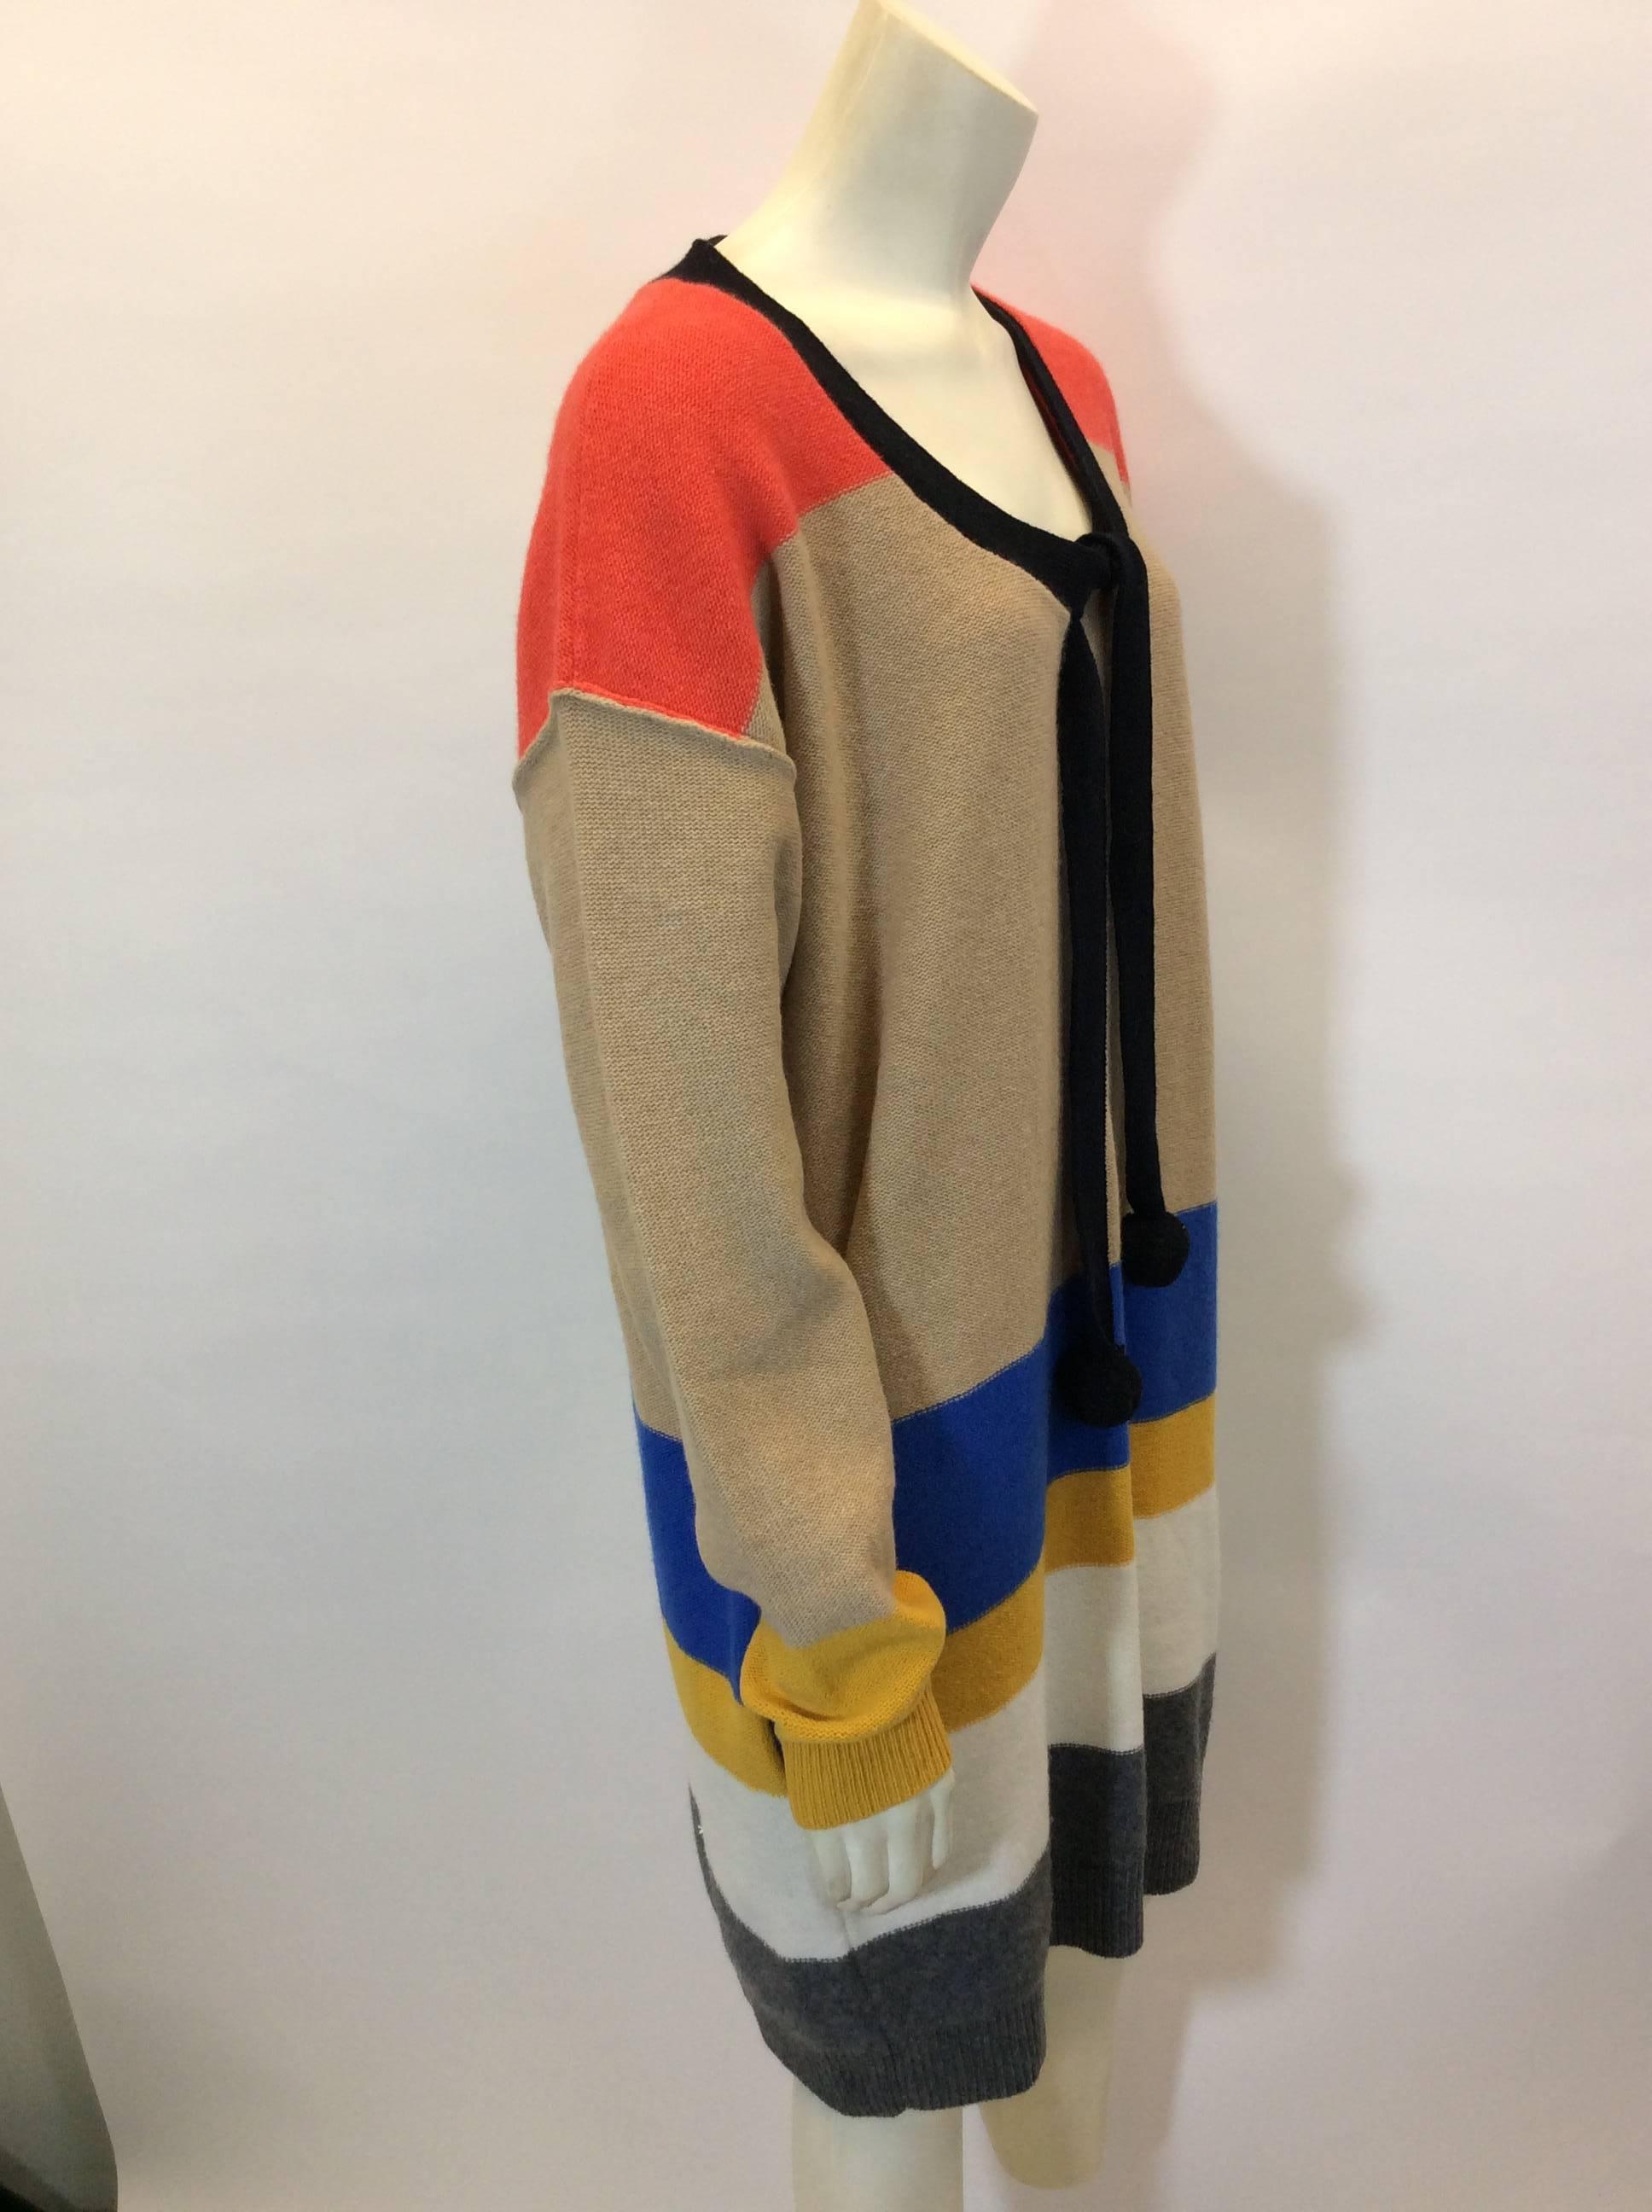 Sonia Rykiel Multicolor Striped Tunic with Pom Pom Neck Tie In Excellent Condition For Sale In Narberth, PA